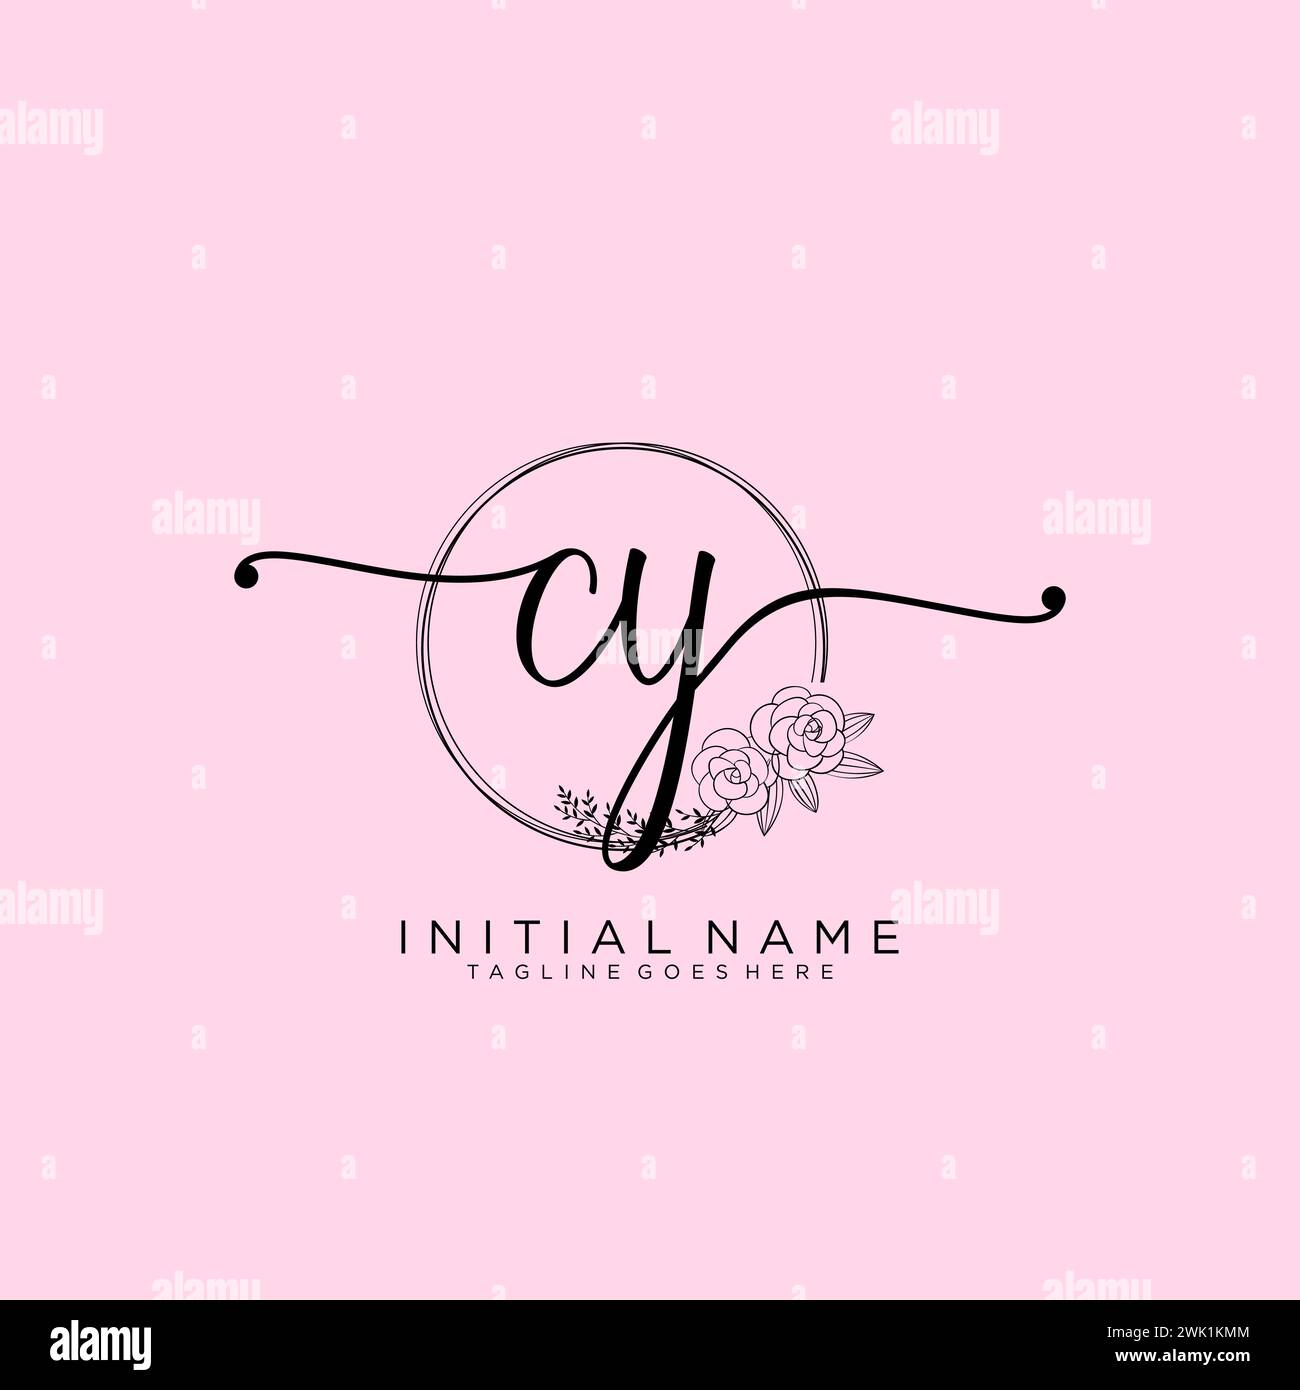 CY Initial handwriting logo with circle Stock Vector